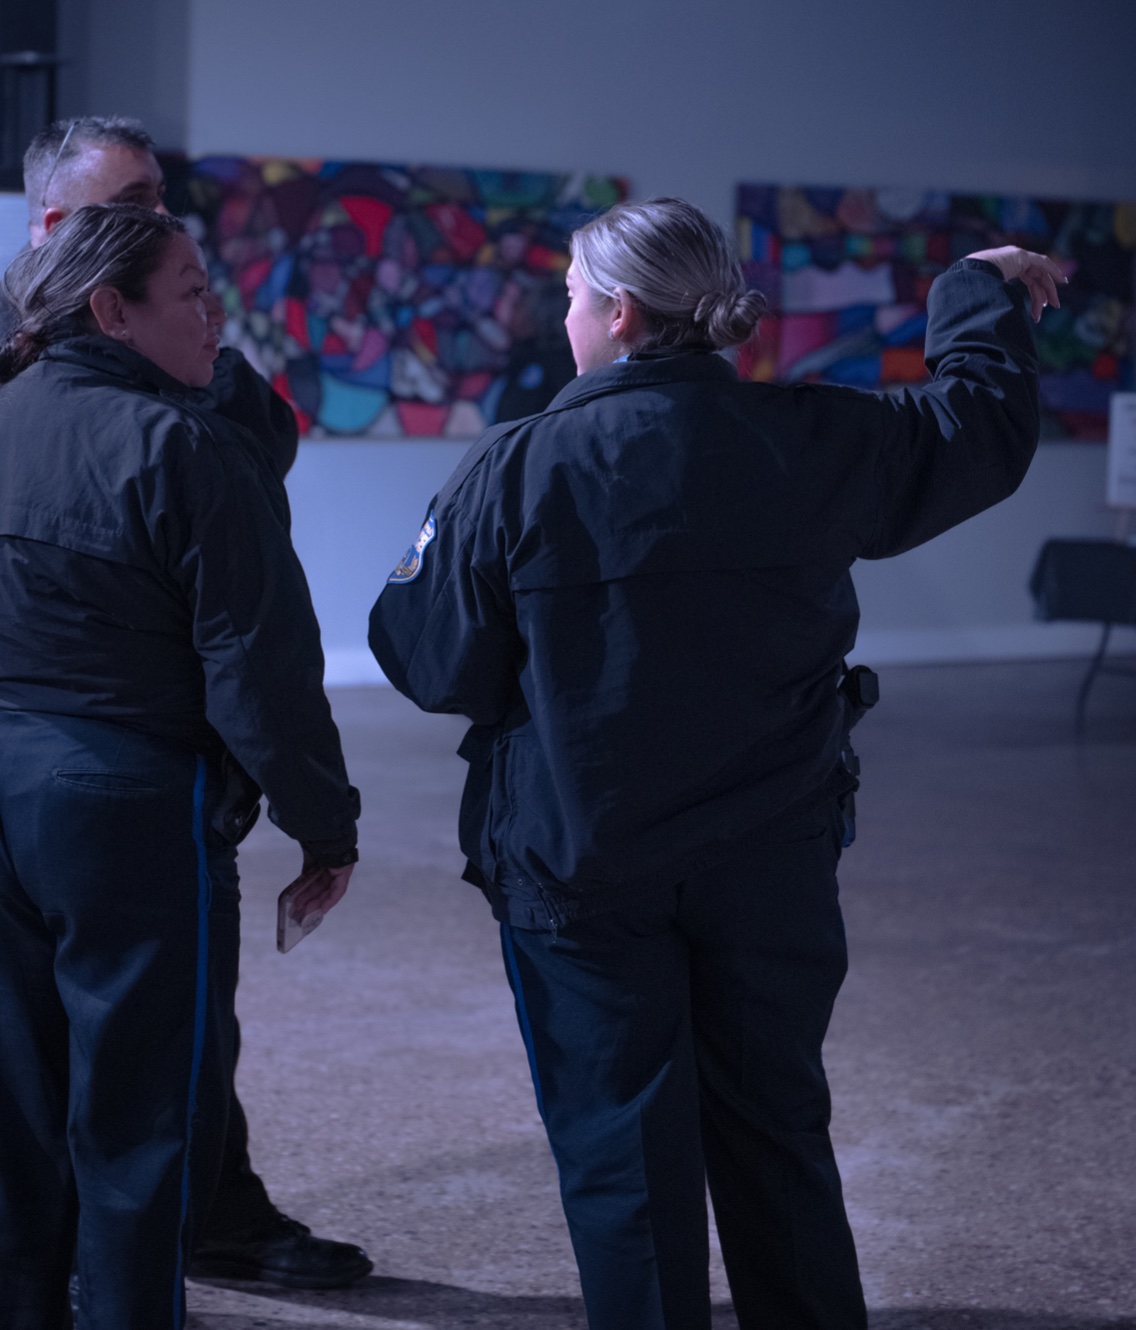 A candid photo taken during KCAPA's "Story Time" art exhibit. A group of three police officers are conversing with their backs turned to the camera. The background shows two artworks that look like mosaics.